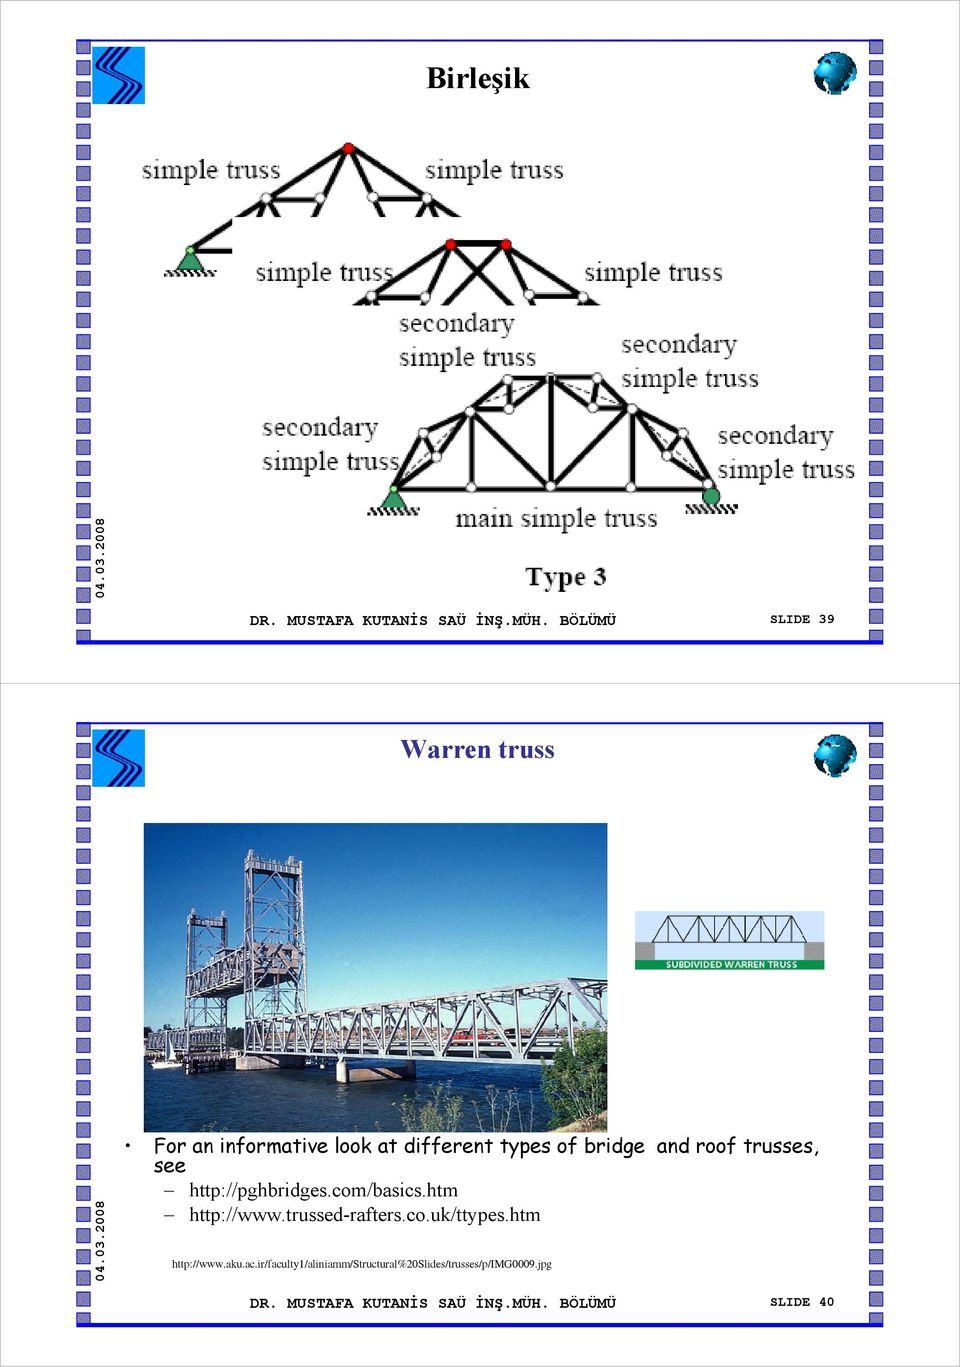 roof trusses, see http://pghbridges.com/basics.htm http://www.trussed-rafters.co.uk/ttypes.